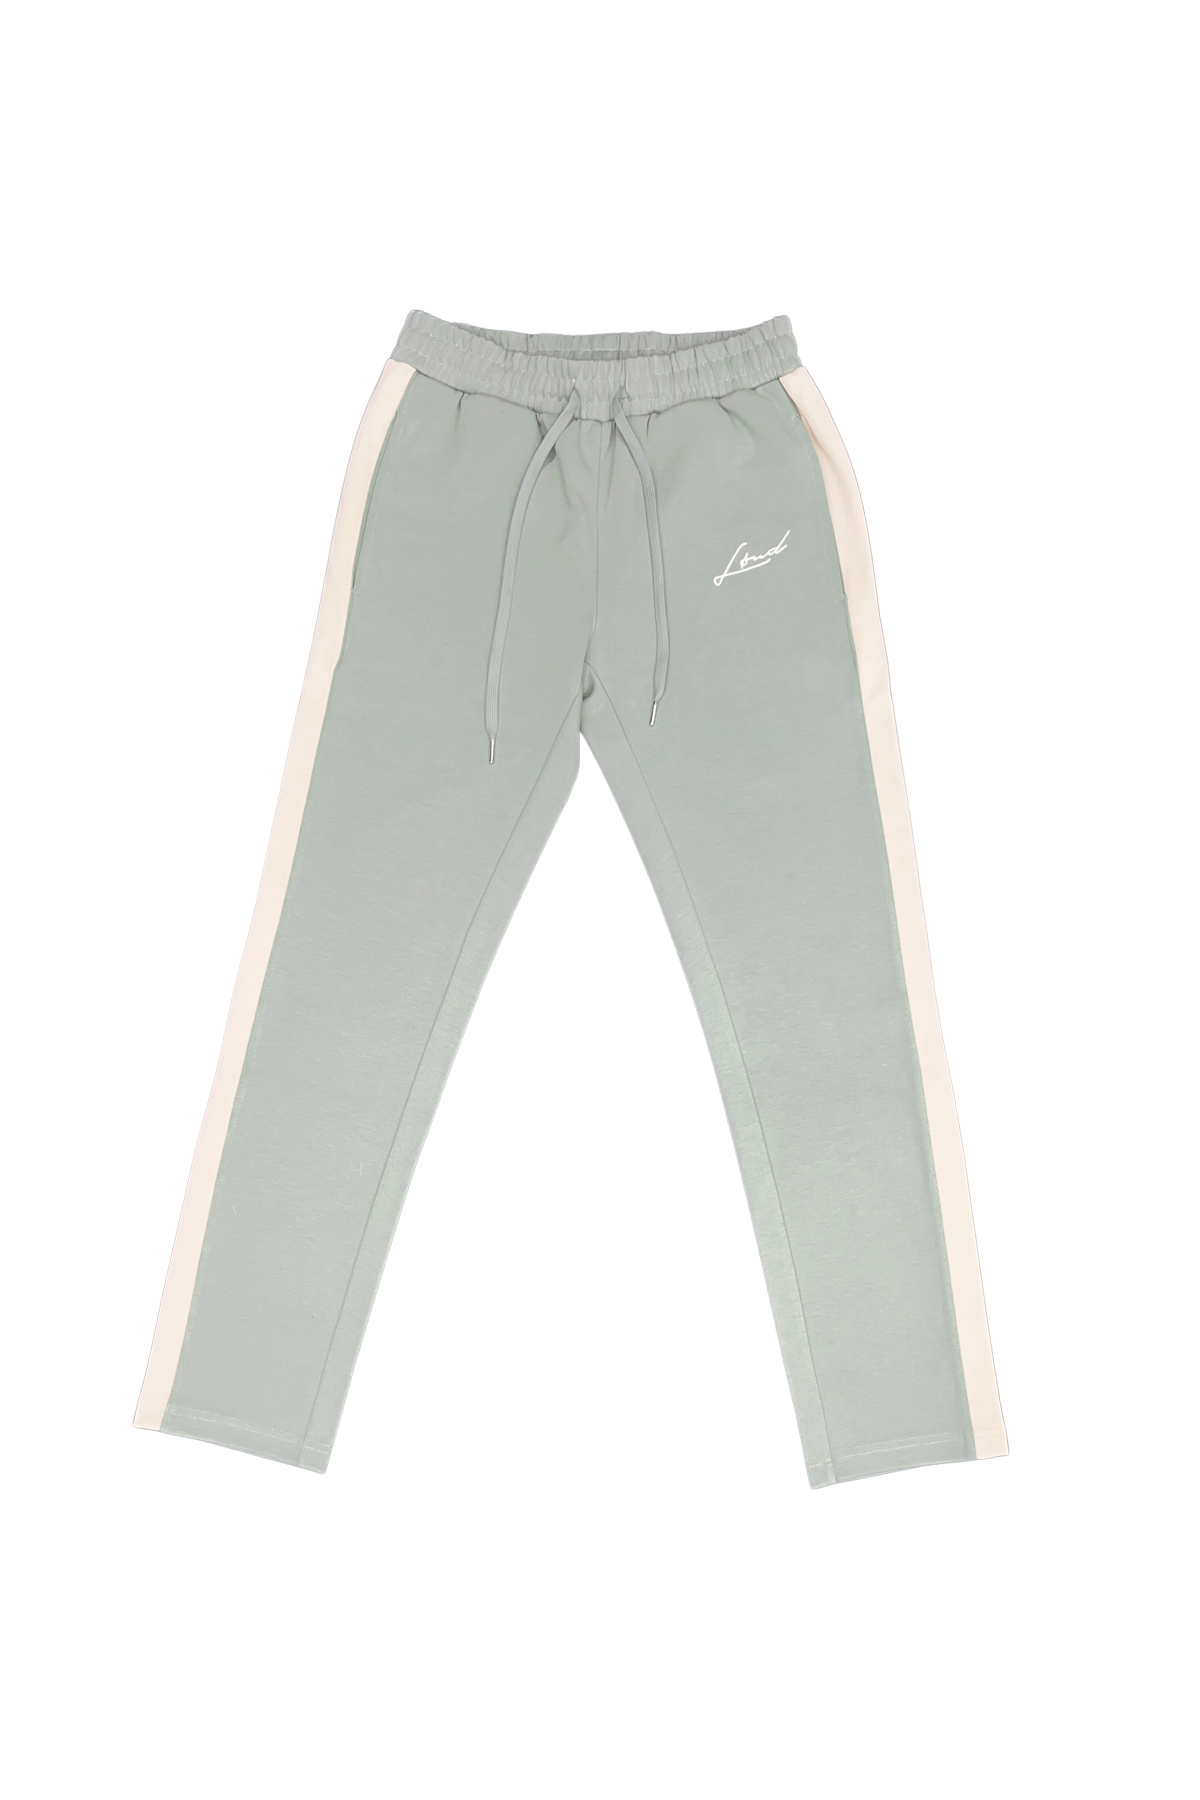 Loud Mint and Cream Joggers - Live Look Loud